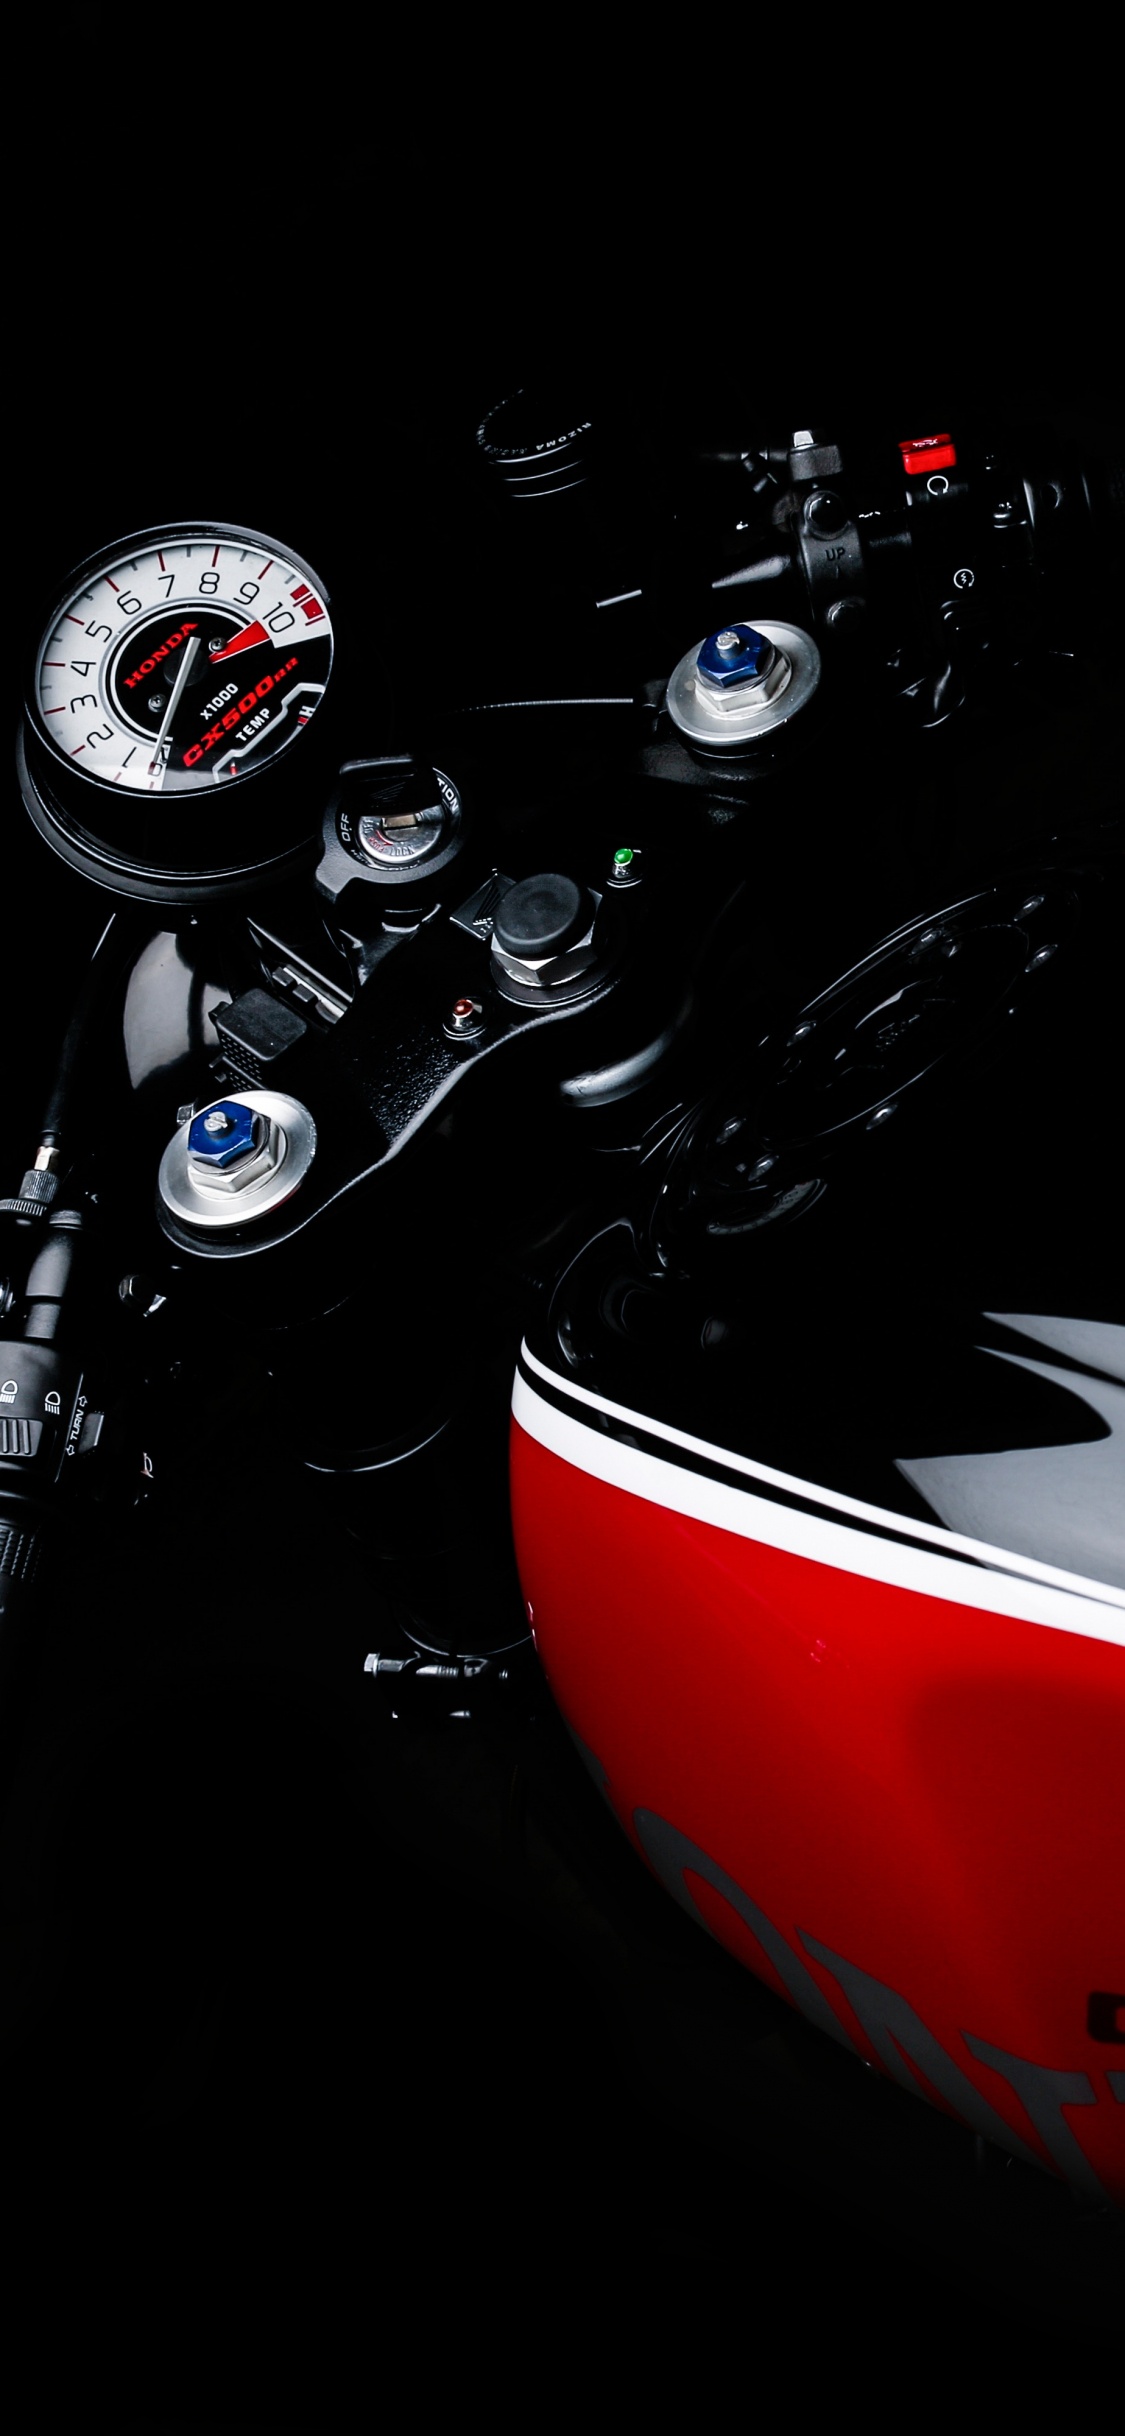 Red and Black Honda Motorcycle. Wallpaper in 1125x2436 Resolution